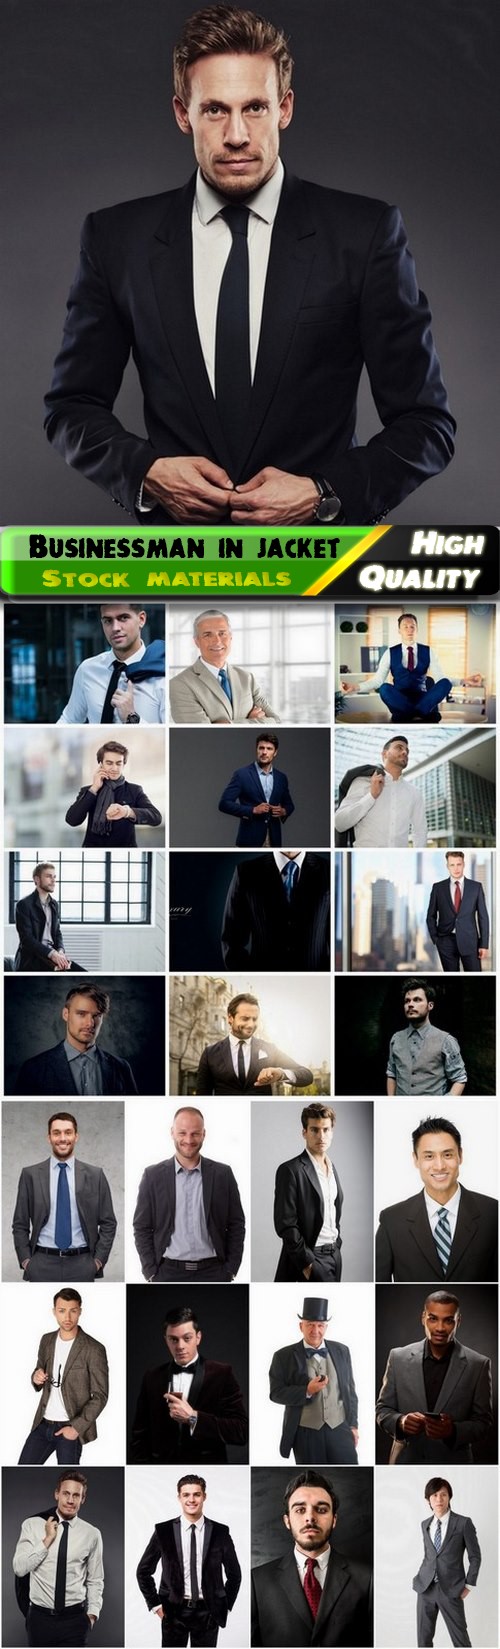 Stylish young and adult businessman in fashionable jacket - 25 HQ Jpg